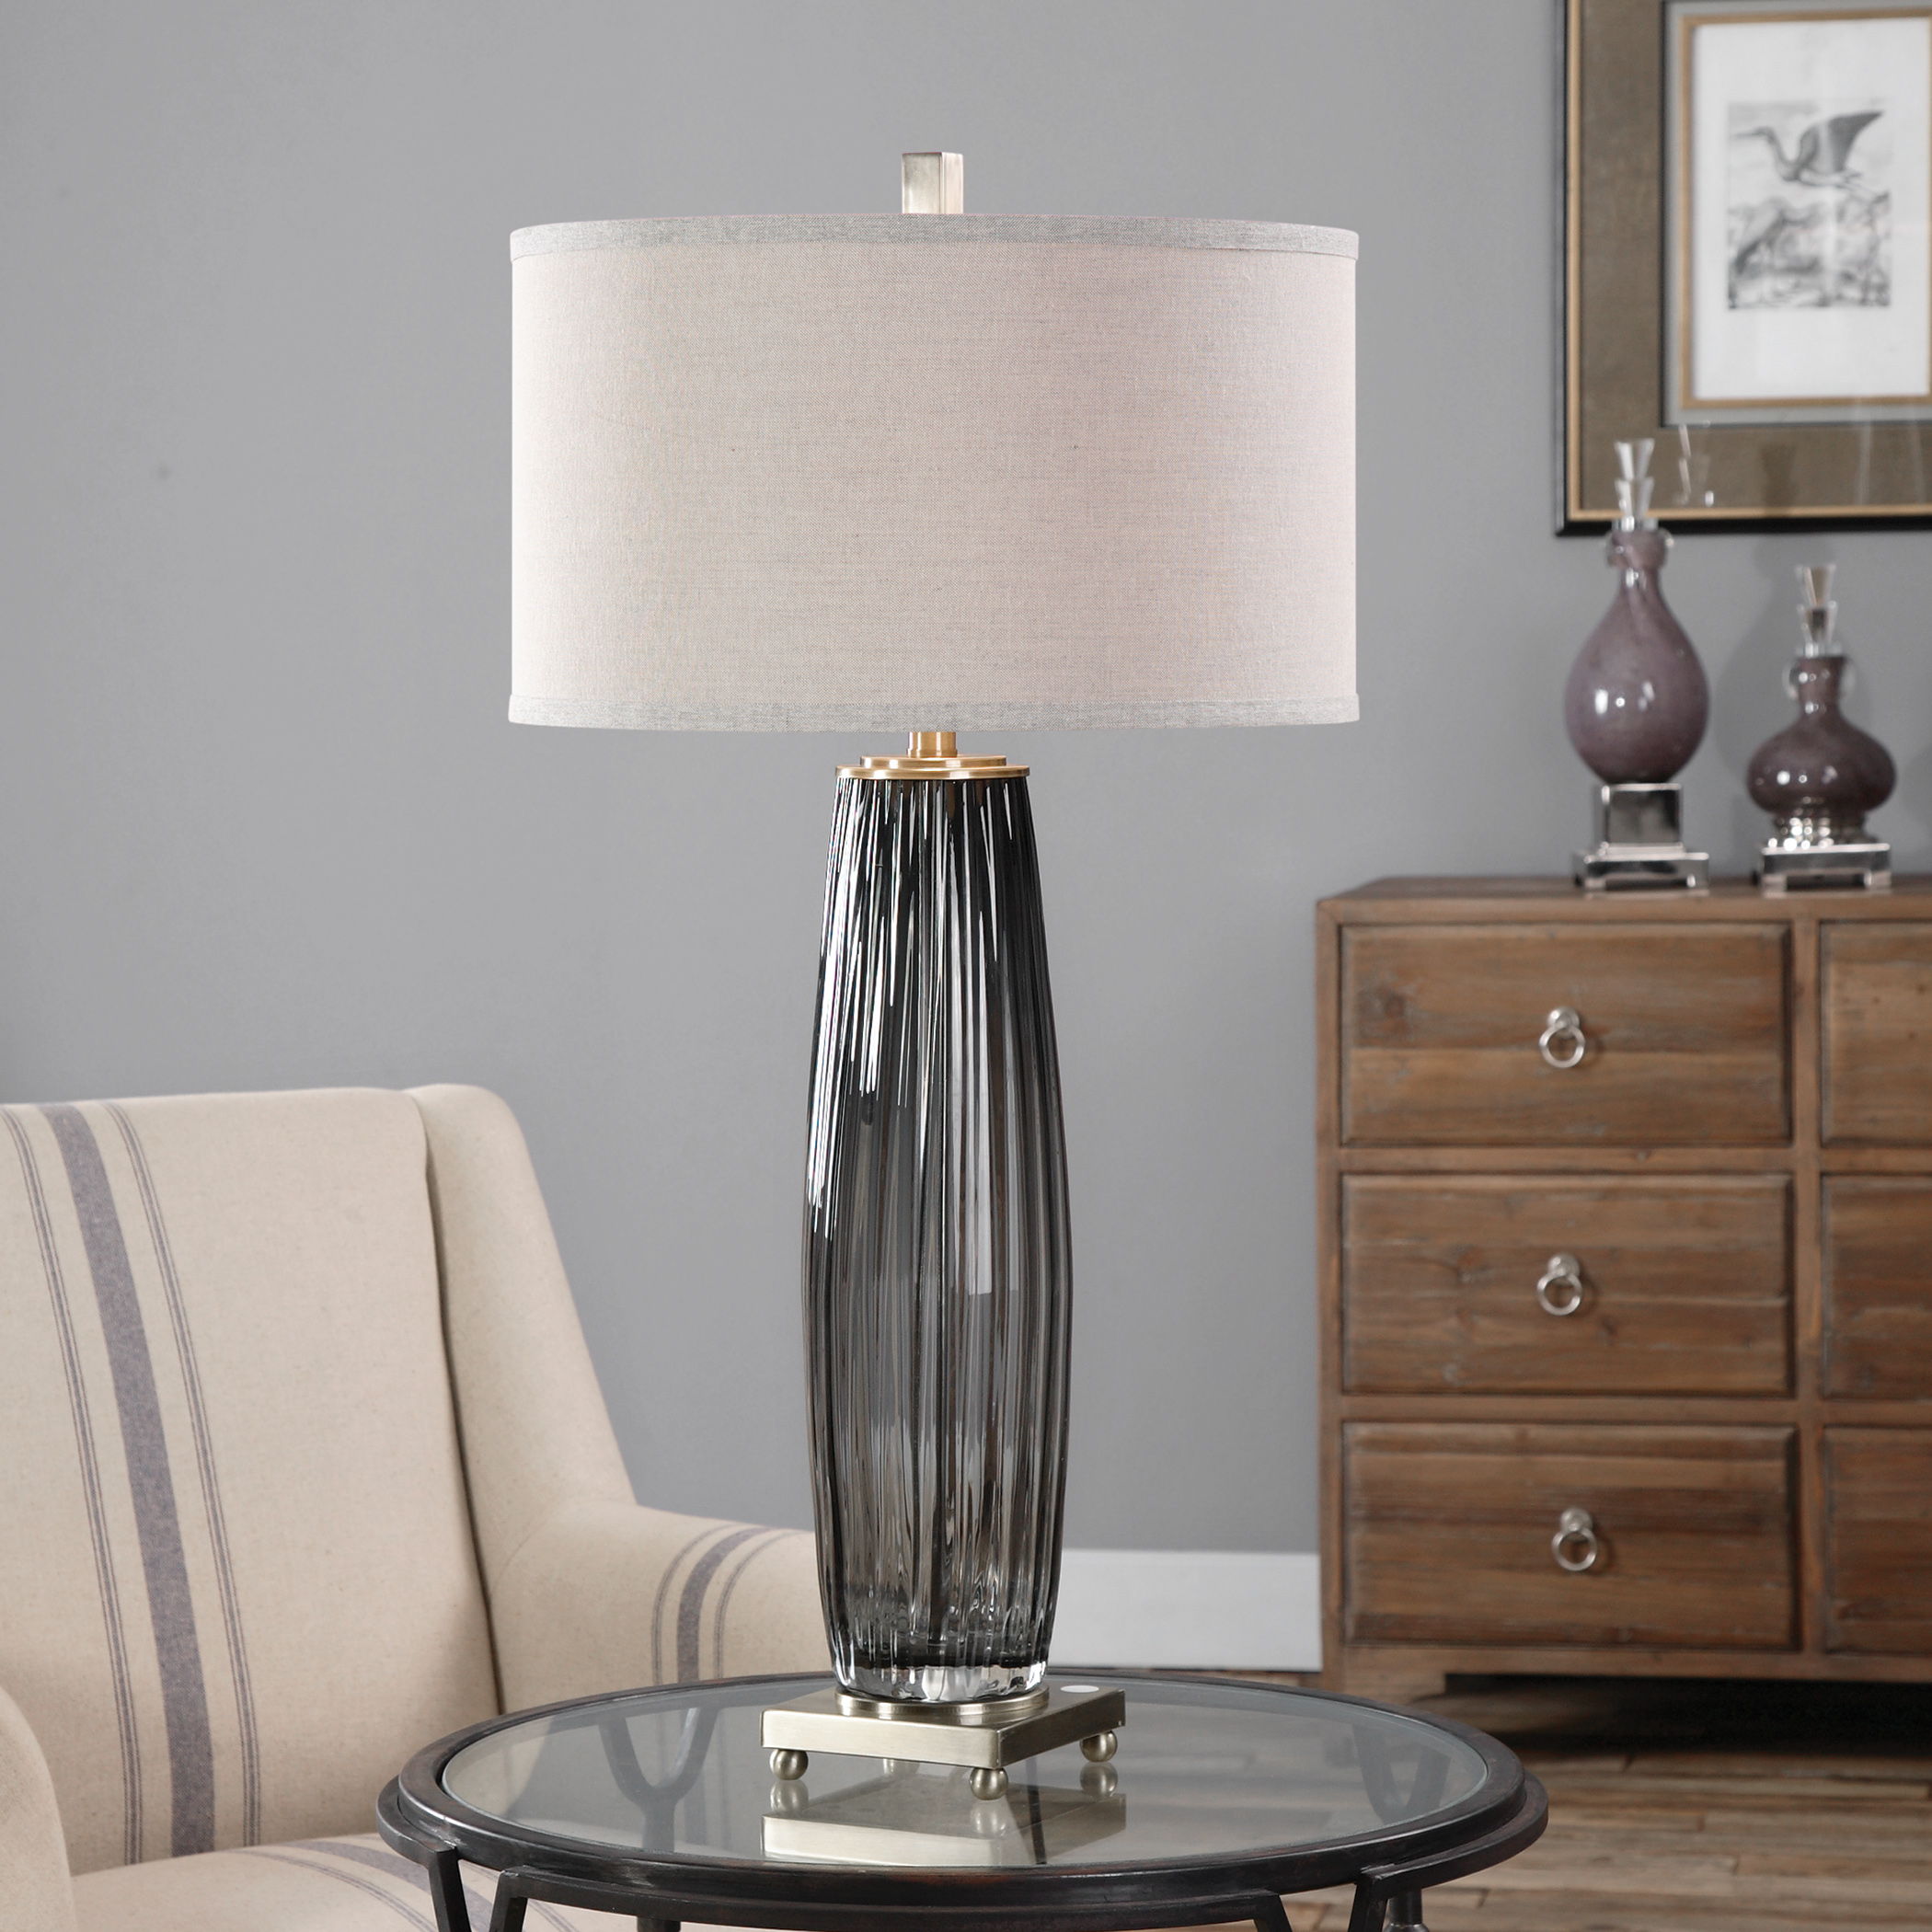 Vilminore - Glass Table Lamp - Gray